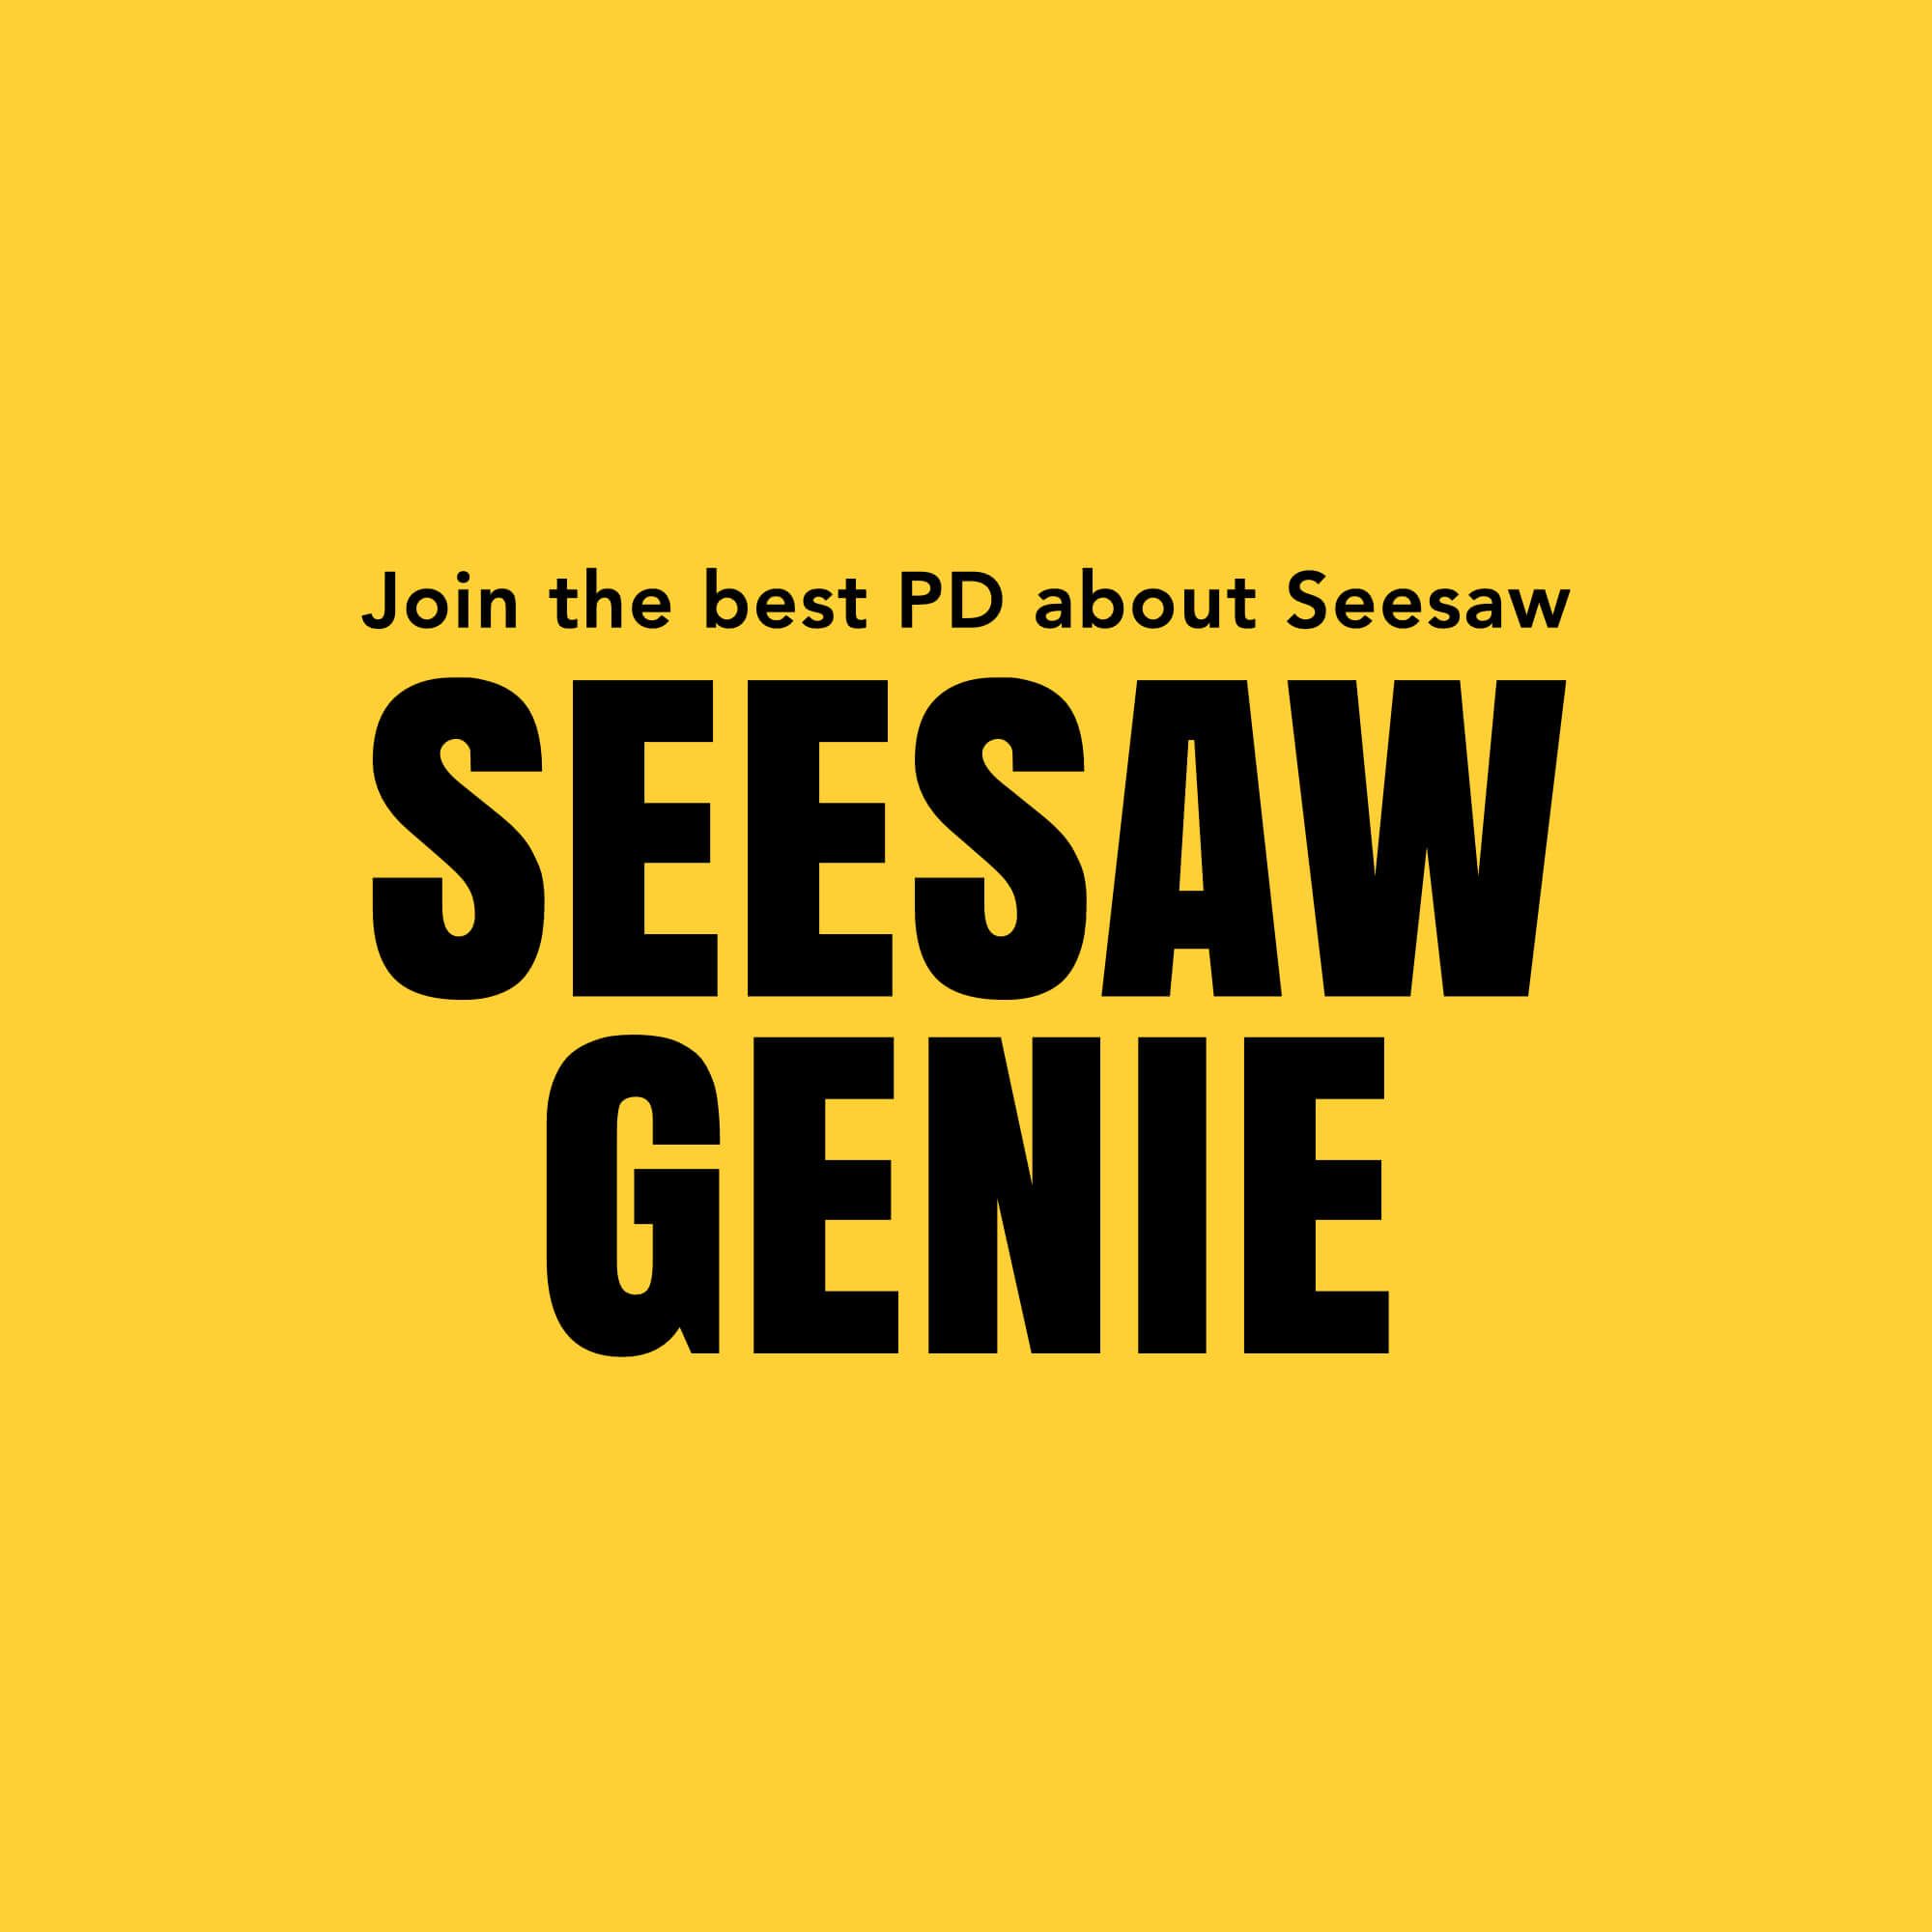 Join Seesaw Genie: the best PD about Seesaw